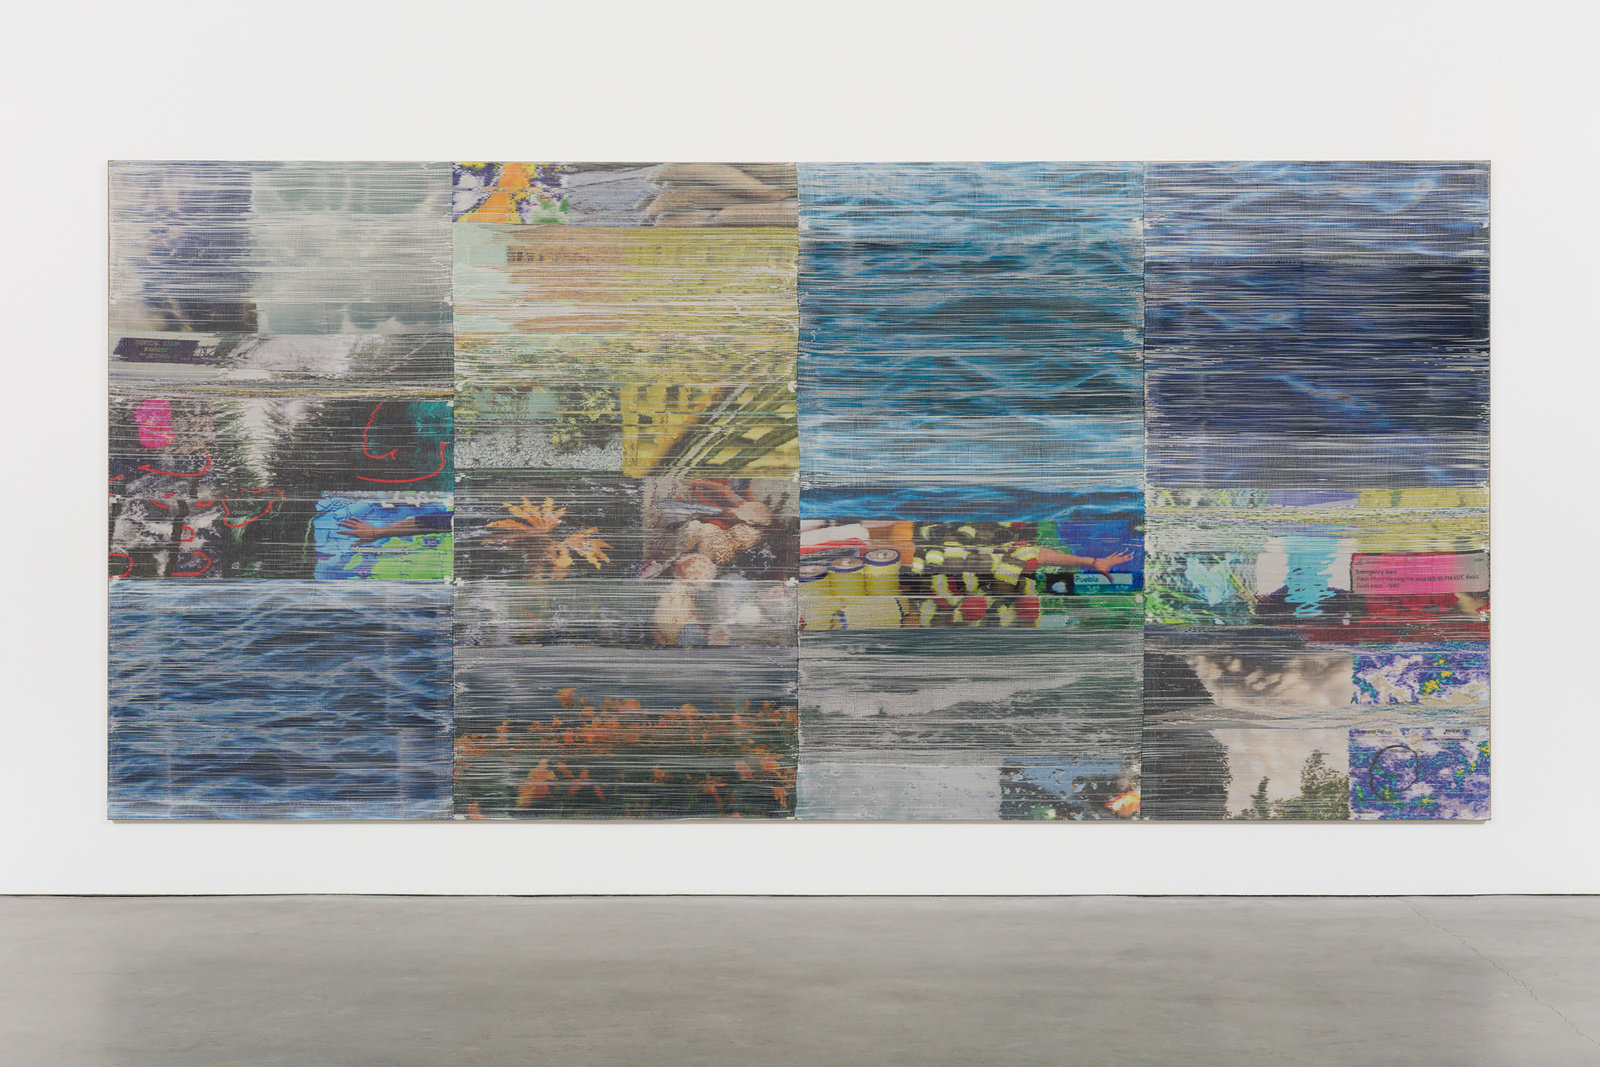 Wolowiec, still water, circling palms, 2018, handwoven polymer, linen, dye sublimation ink, acrylic dye, 90 x 188 in., 228.6 x 477.5 cm, cnon 60.240 courtesy pierre le hors